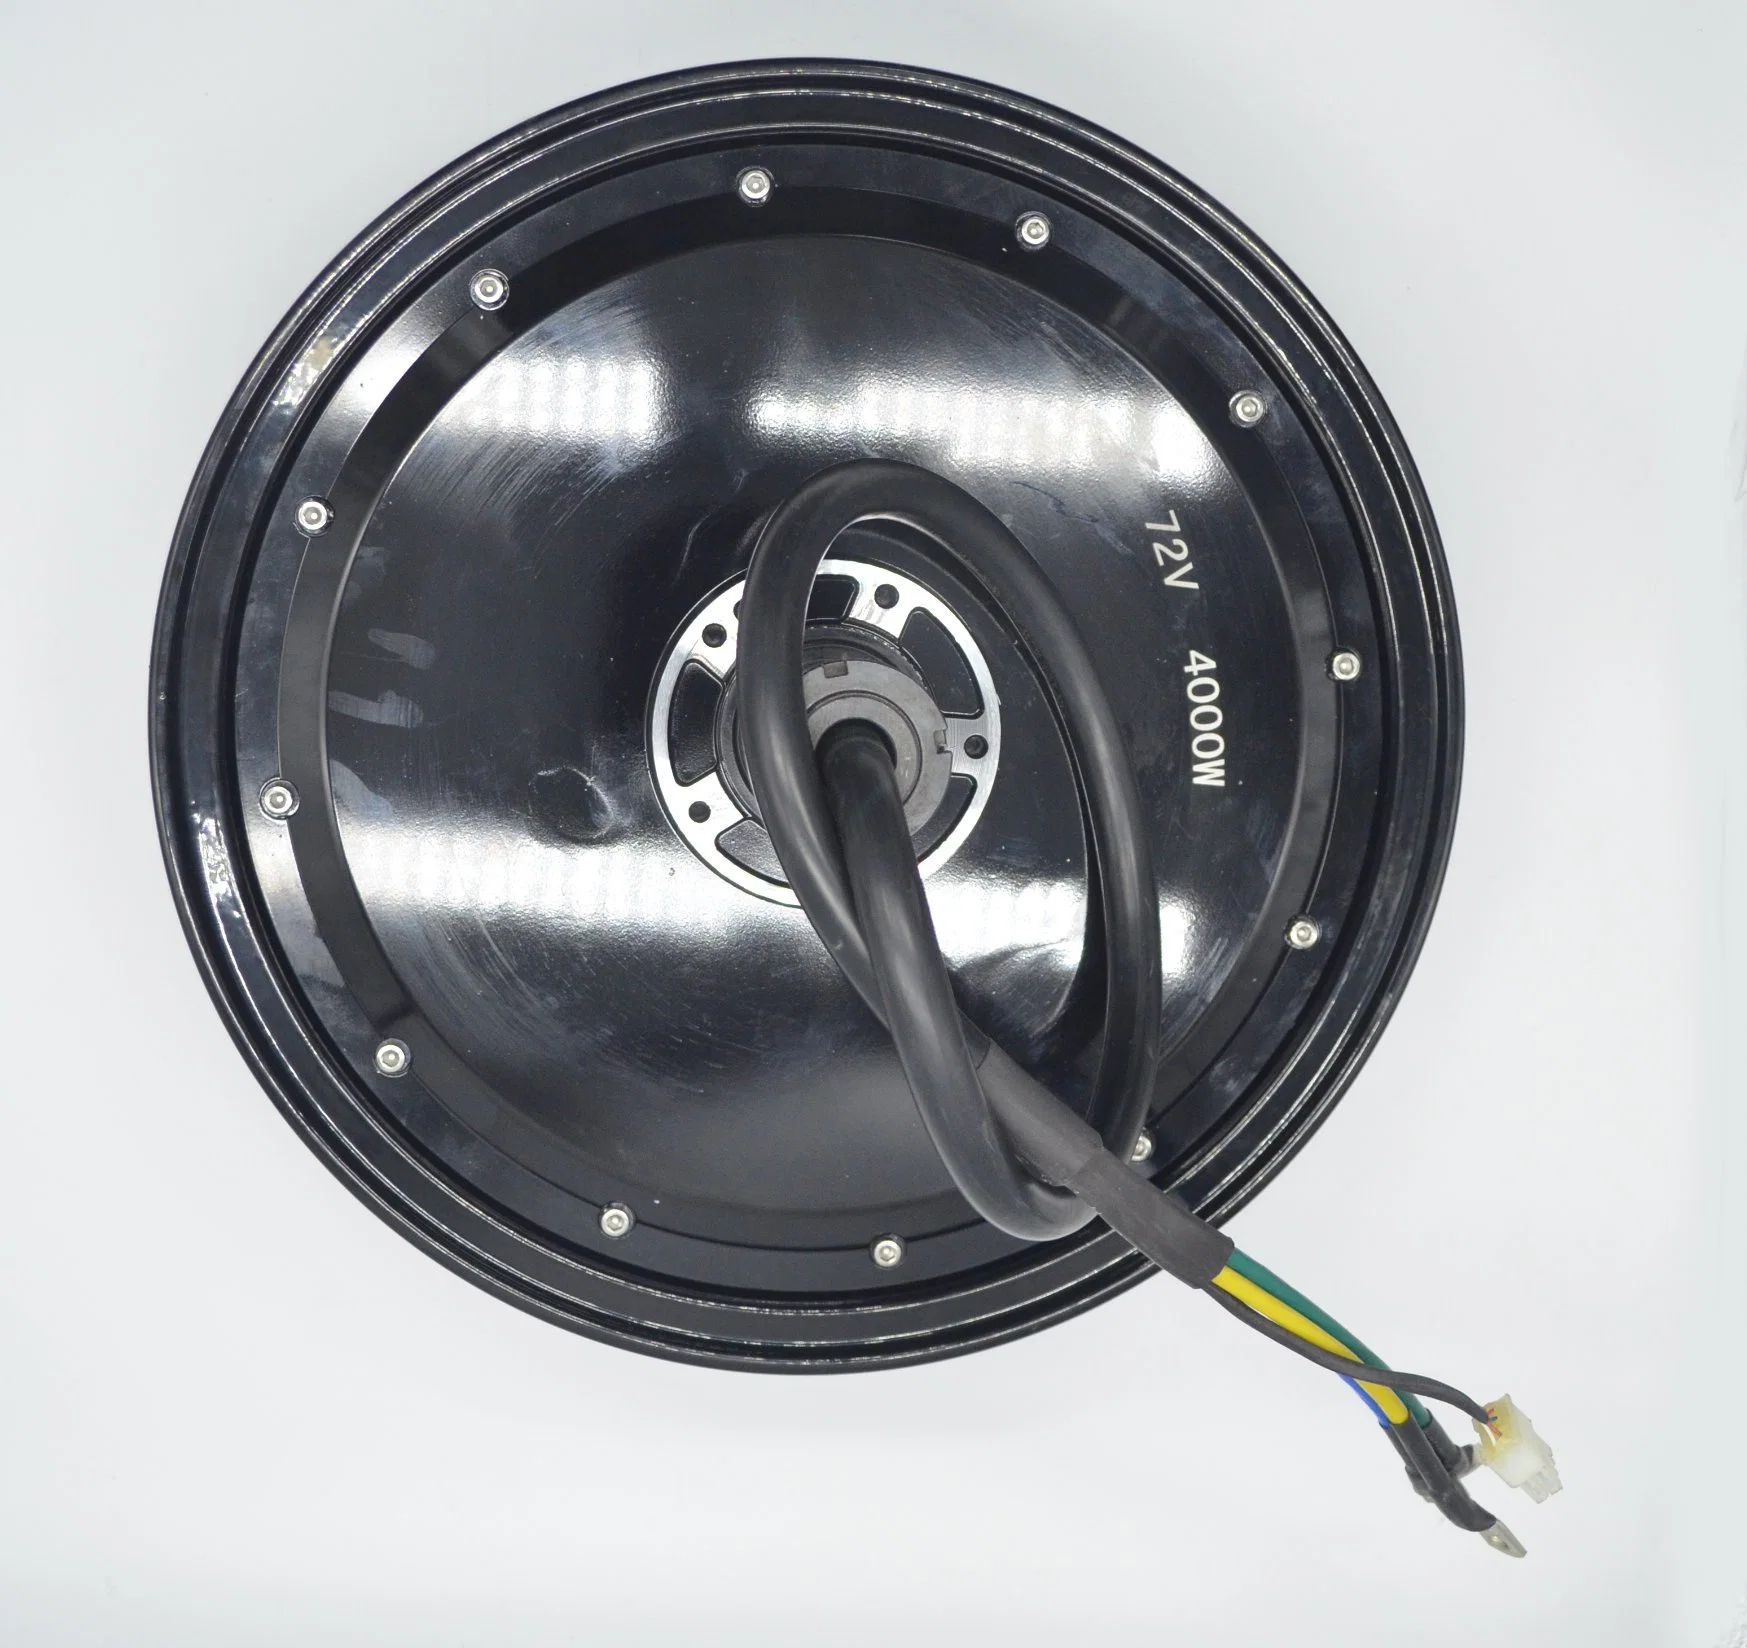 13" 1500W, 3000W, 6000W High Power Electric Motor for Scooter, Motorcycle